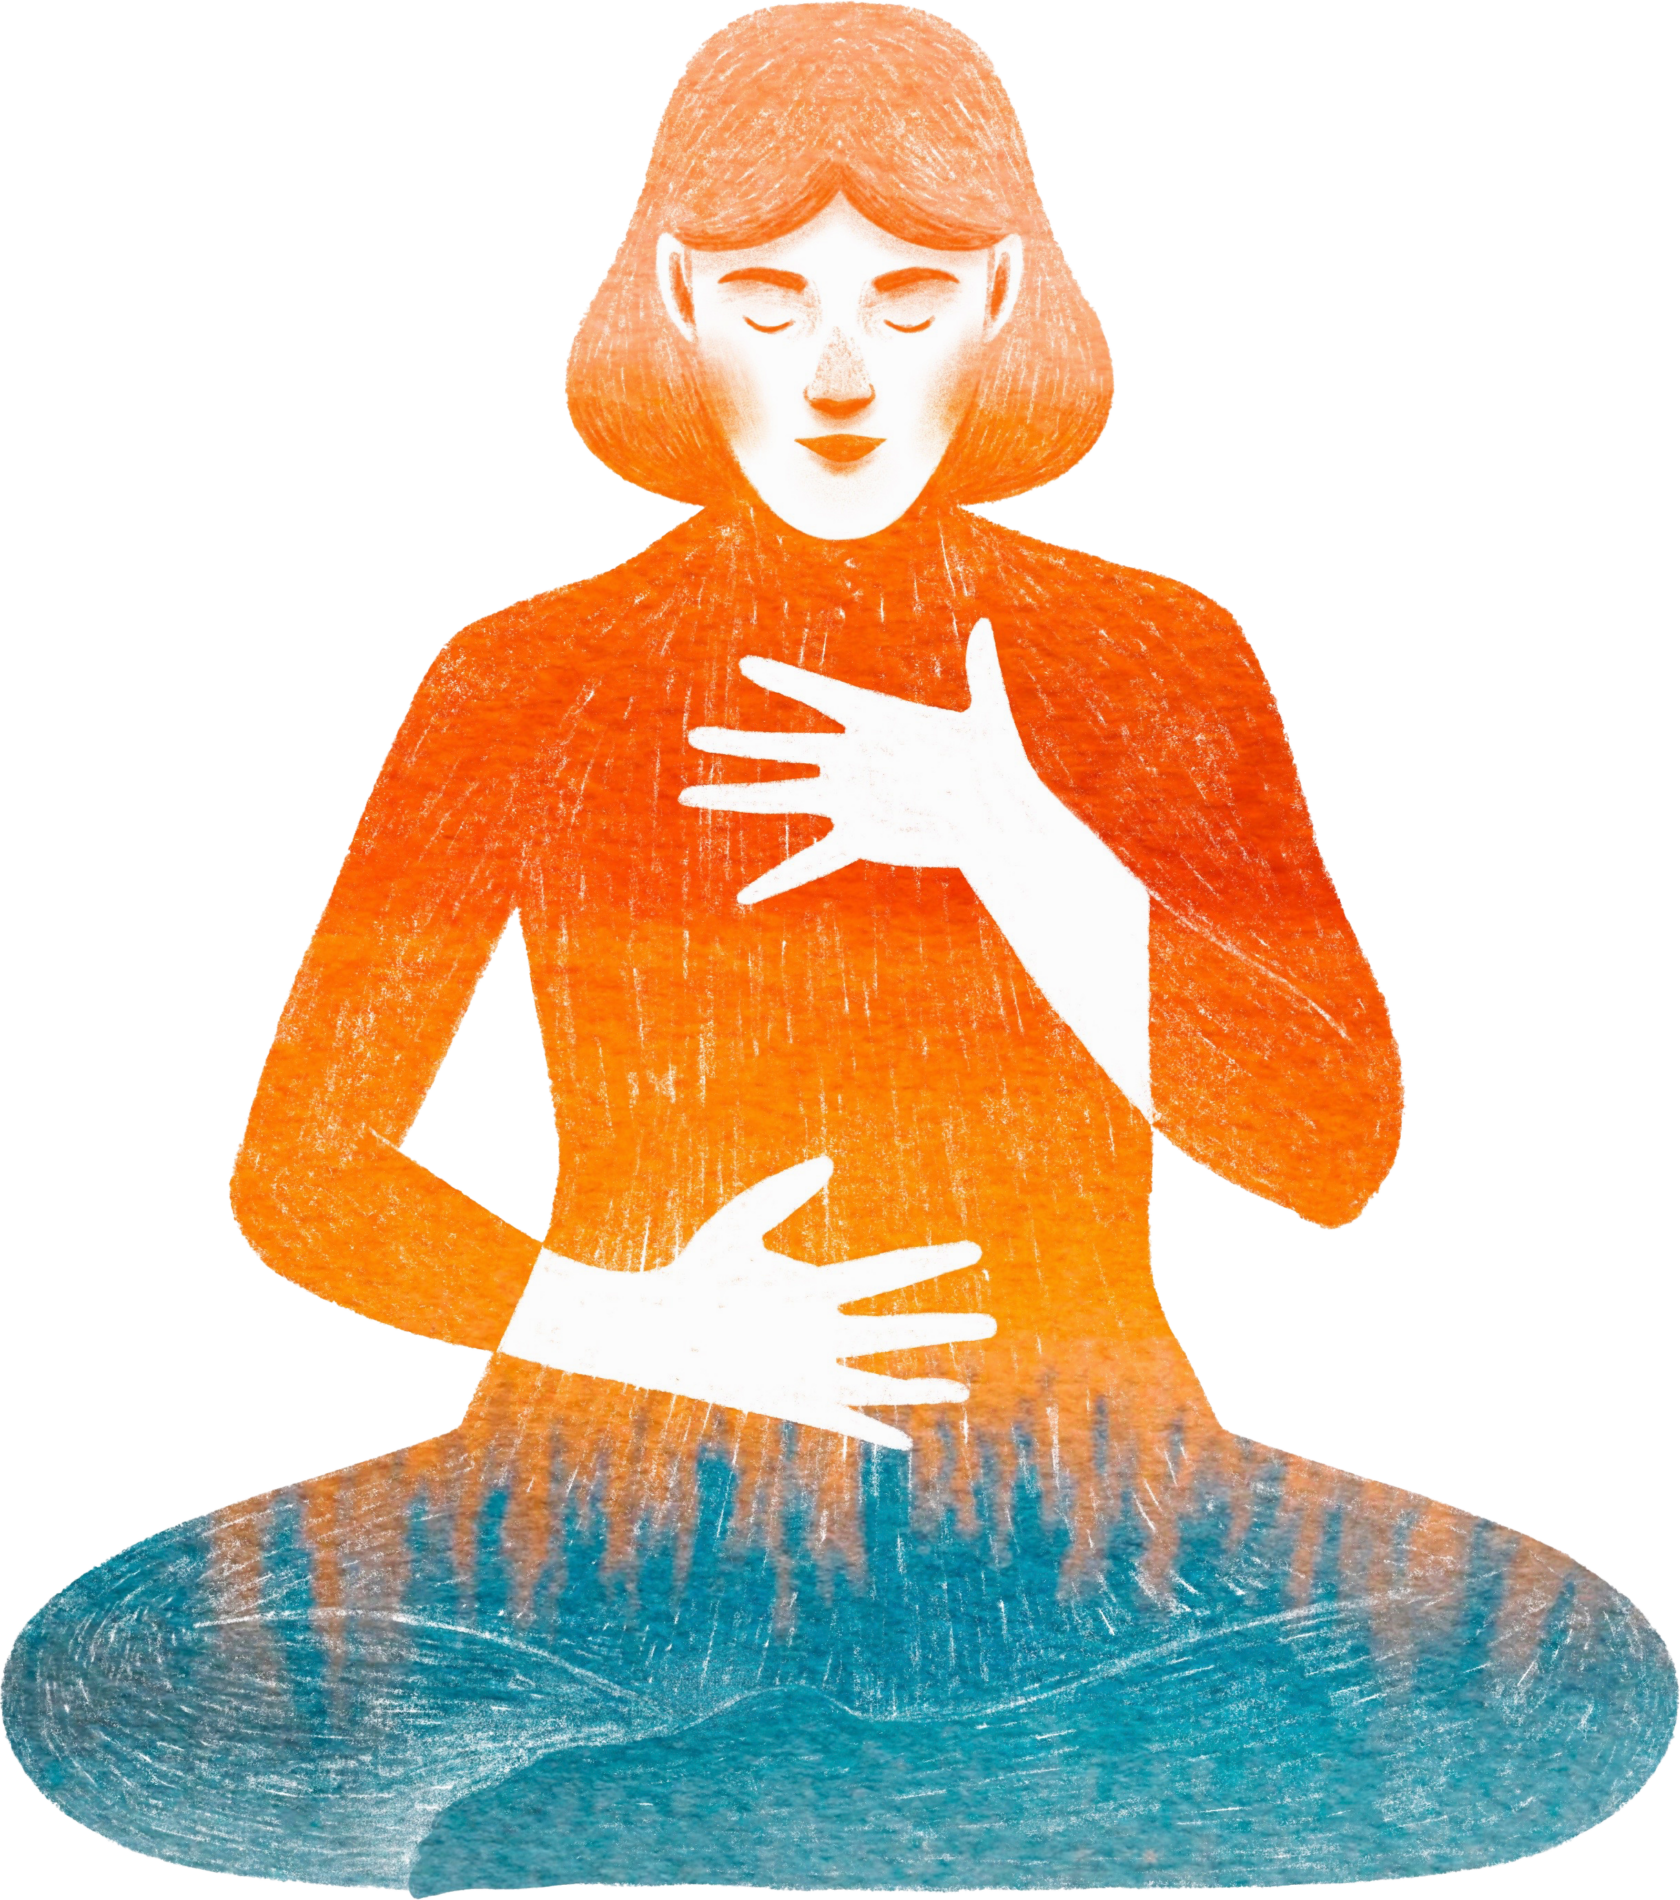 Illustration of a person holding chest and stomach while in lotus position.